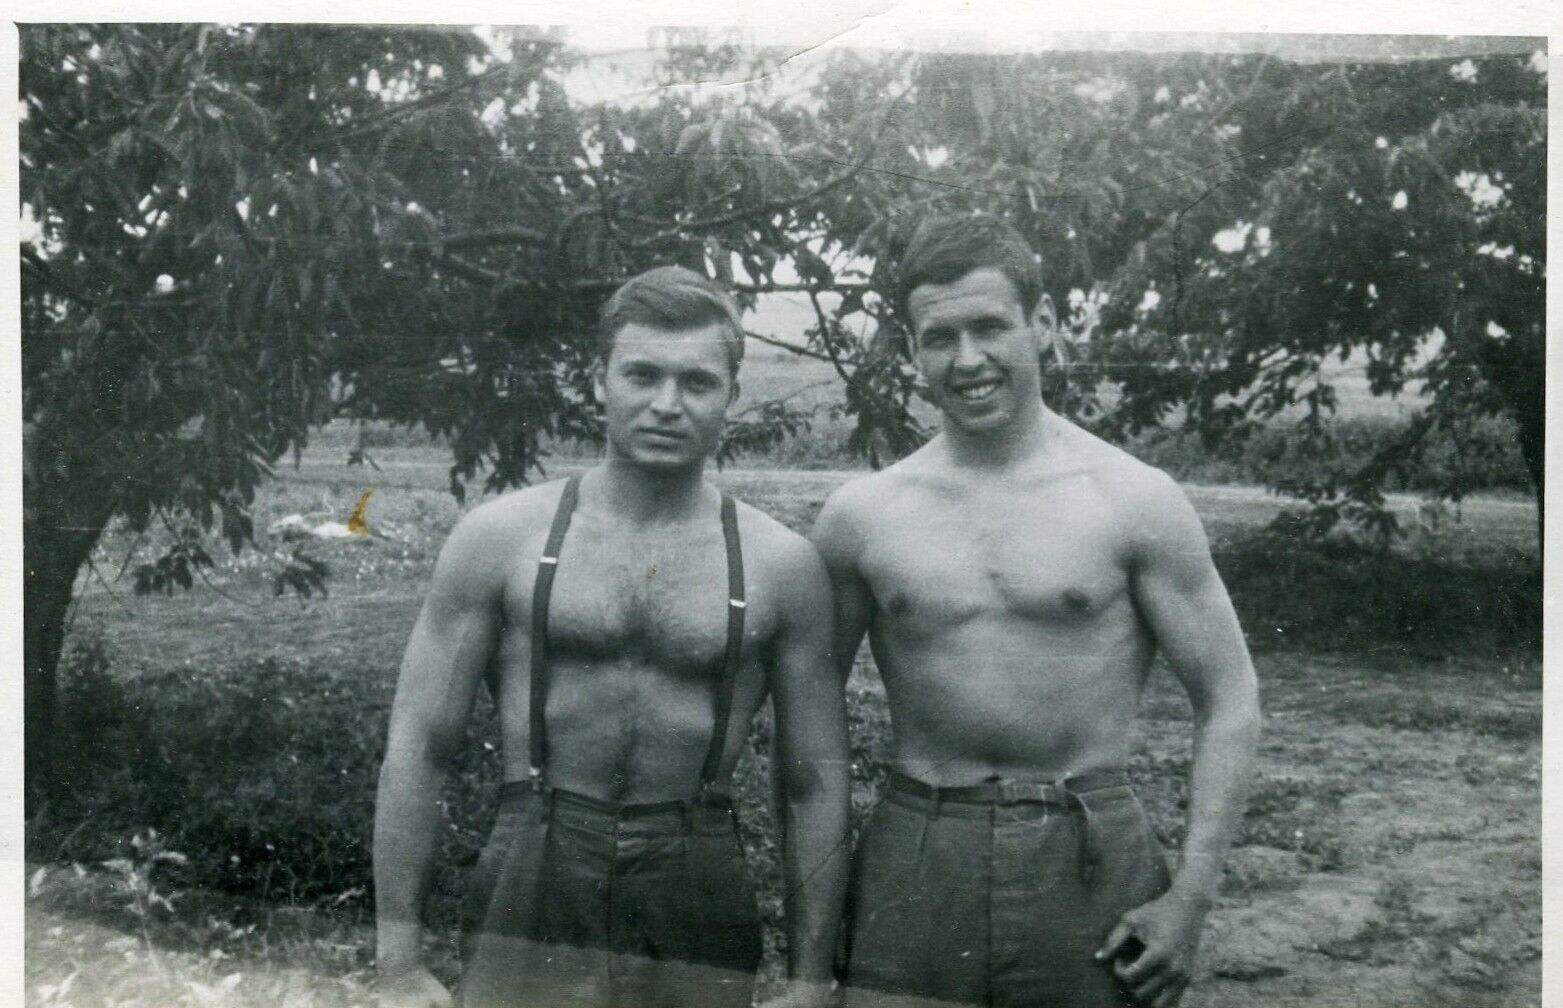 Shirtless Handsome young men hairy chest bulge beach trunks gay vtg photo